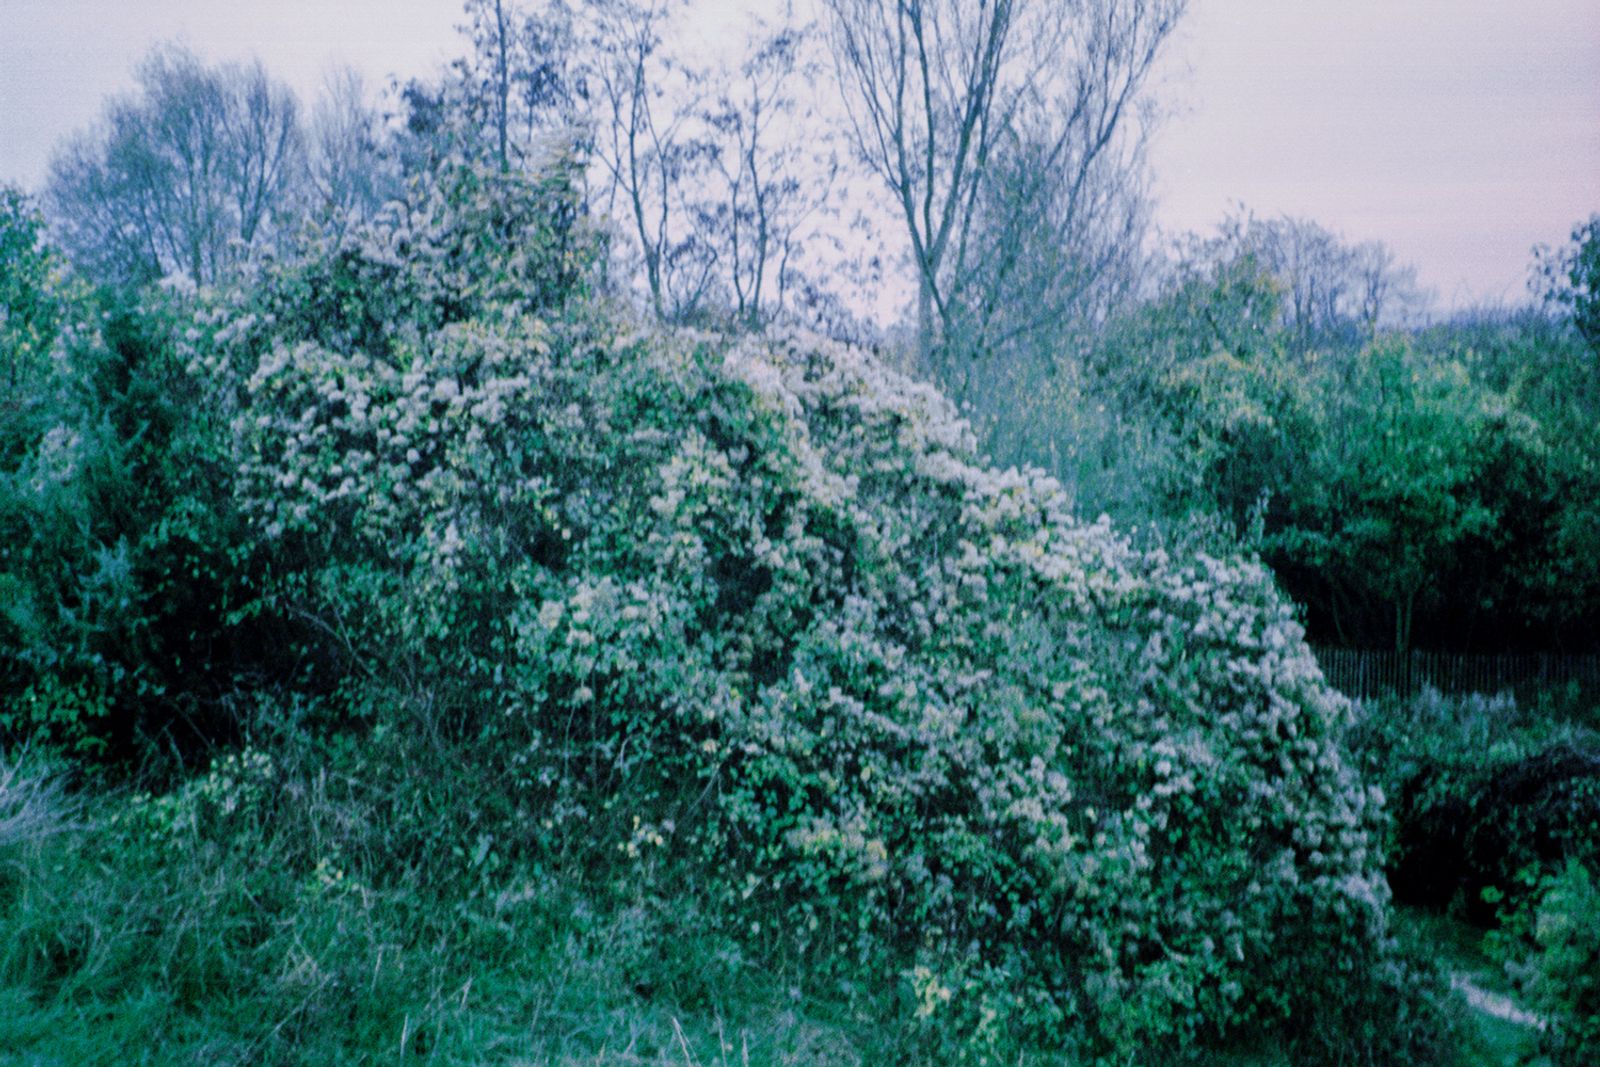 © Clara Chichin - Image from the The back of trees photography project